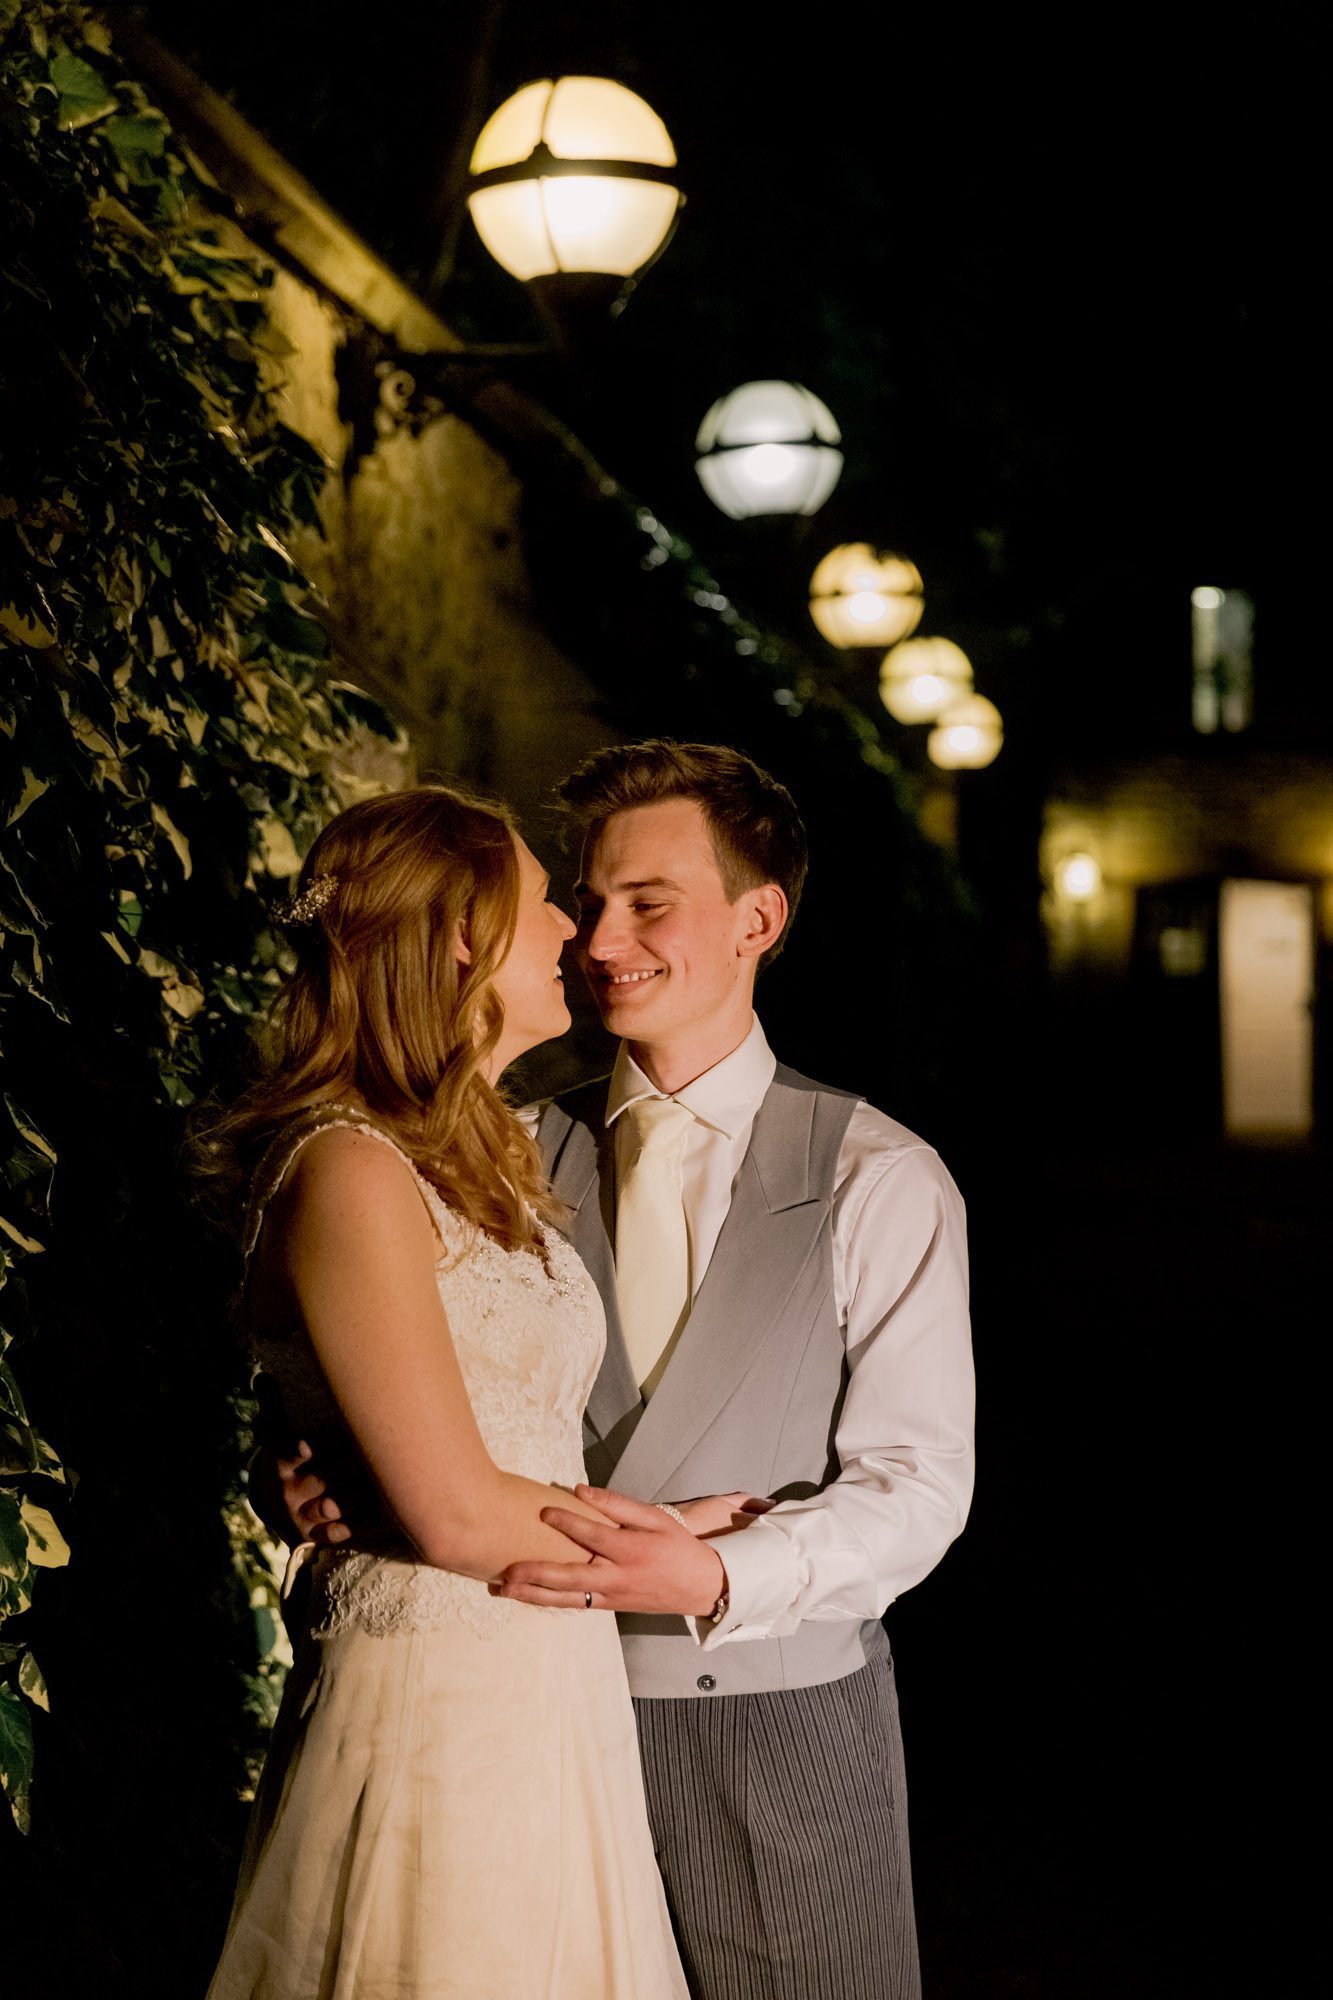 Bride and groom laugh together on their wedding day at Nutfield Priory Wedding Venue in Surrey.